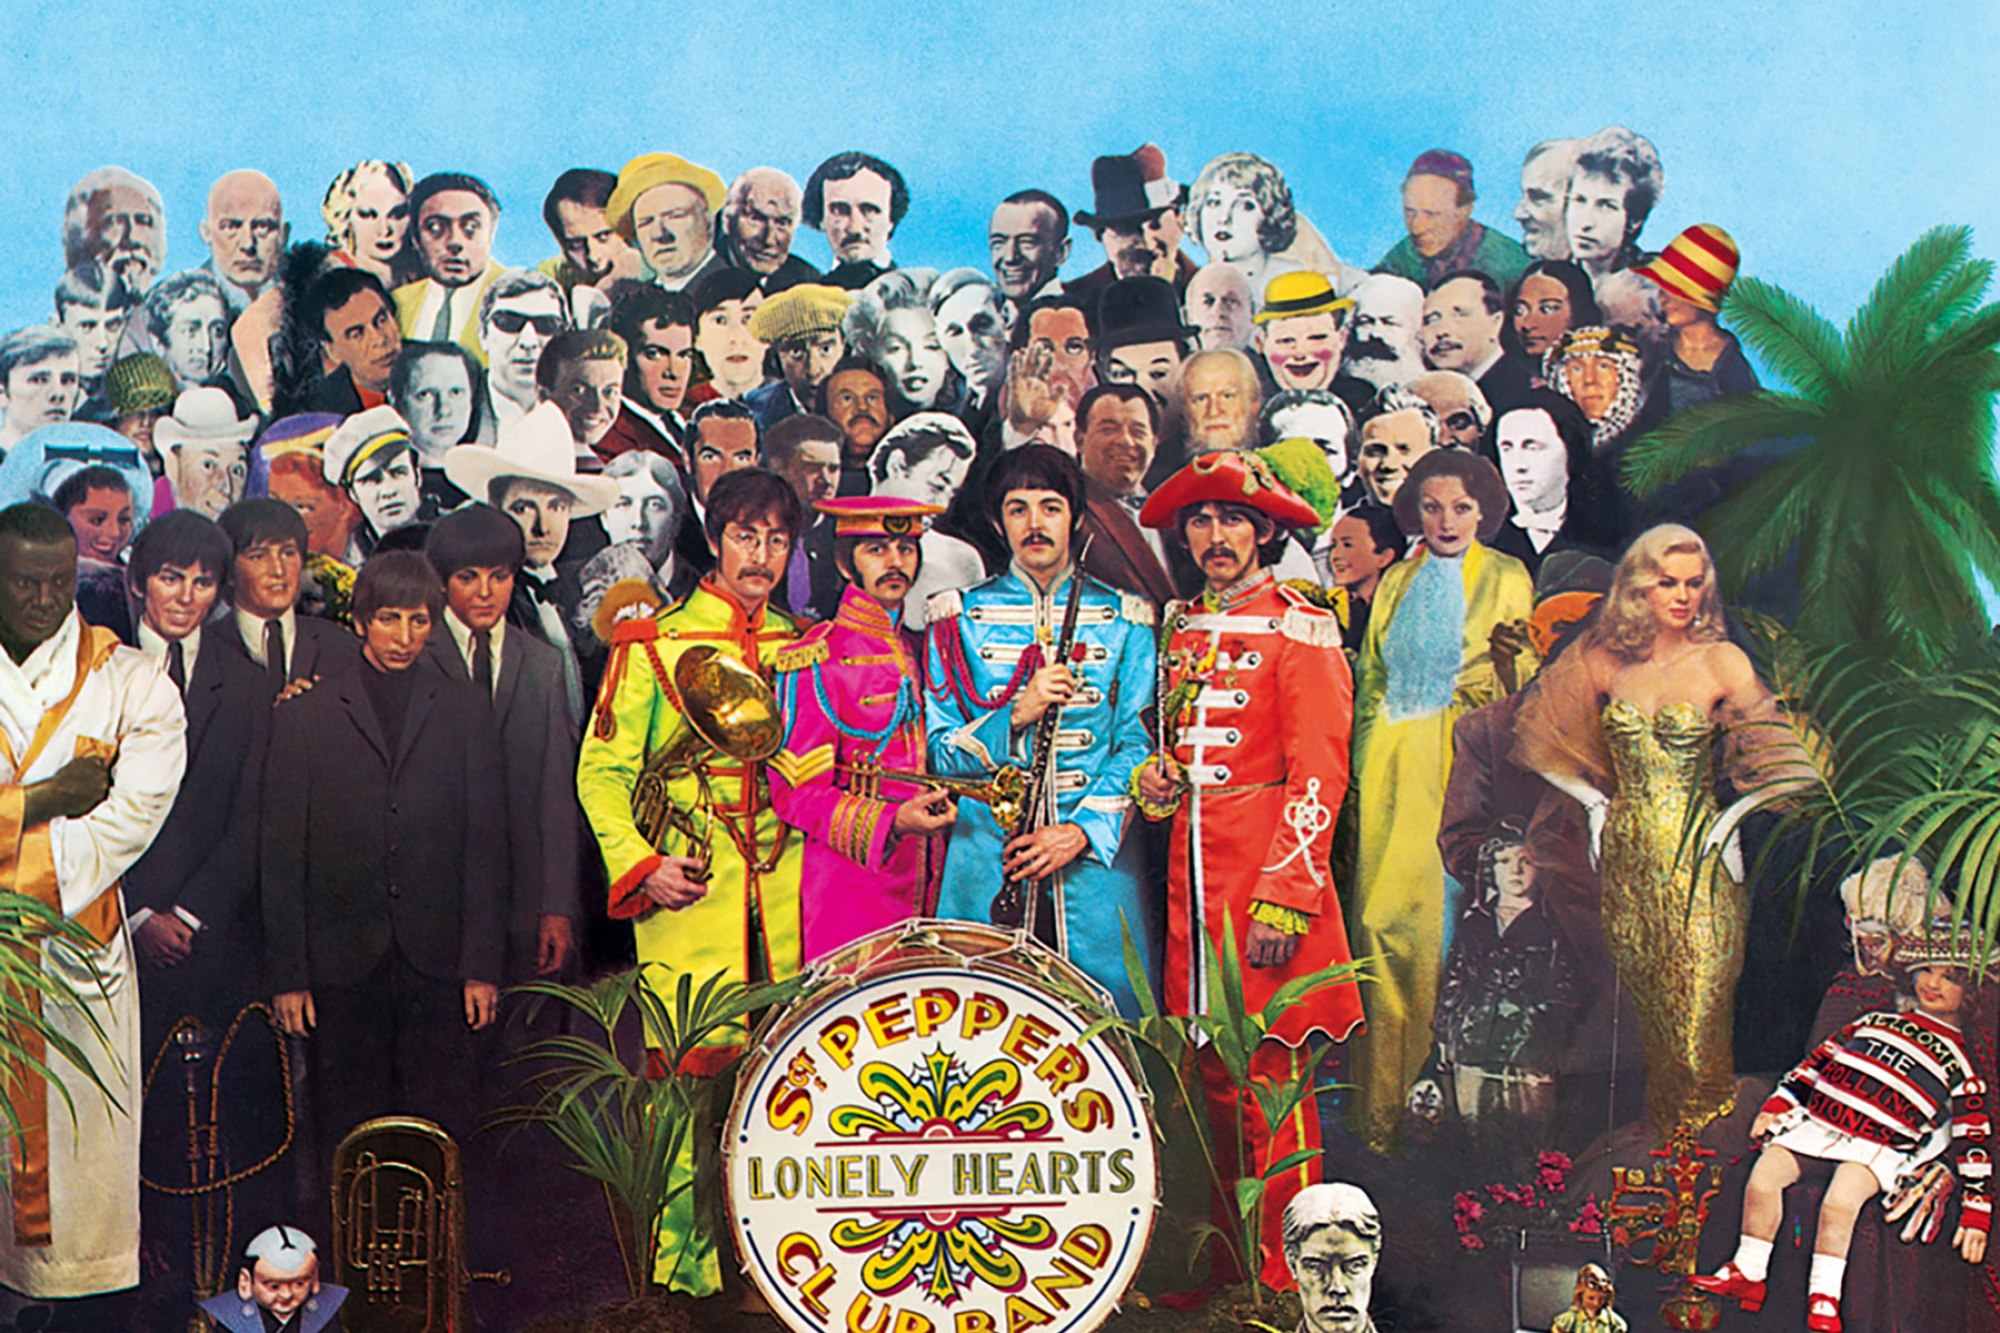 Beatles sgt pepper lonely. Битлз Sgt Pepper s Lonely Hearts Club Band. The Beatles сержант Пеппер. Обложка альбома Битлз сержант Пеппер. Sgt Pepper's Lonely Hearts Club Band обложка.